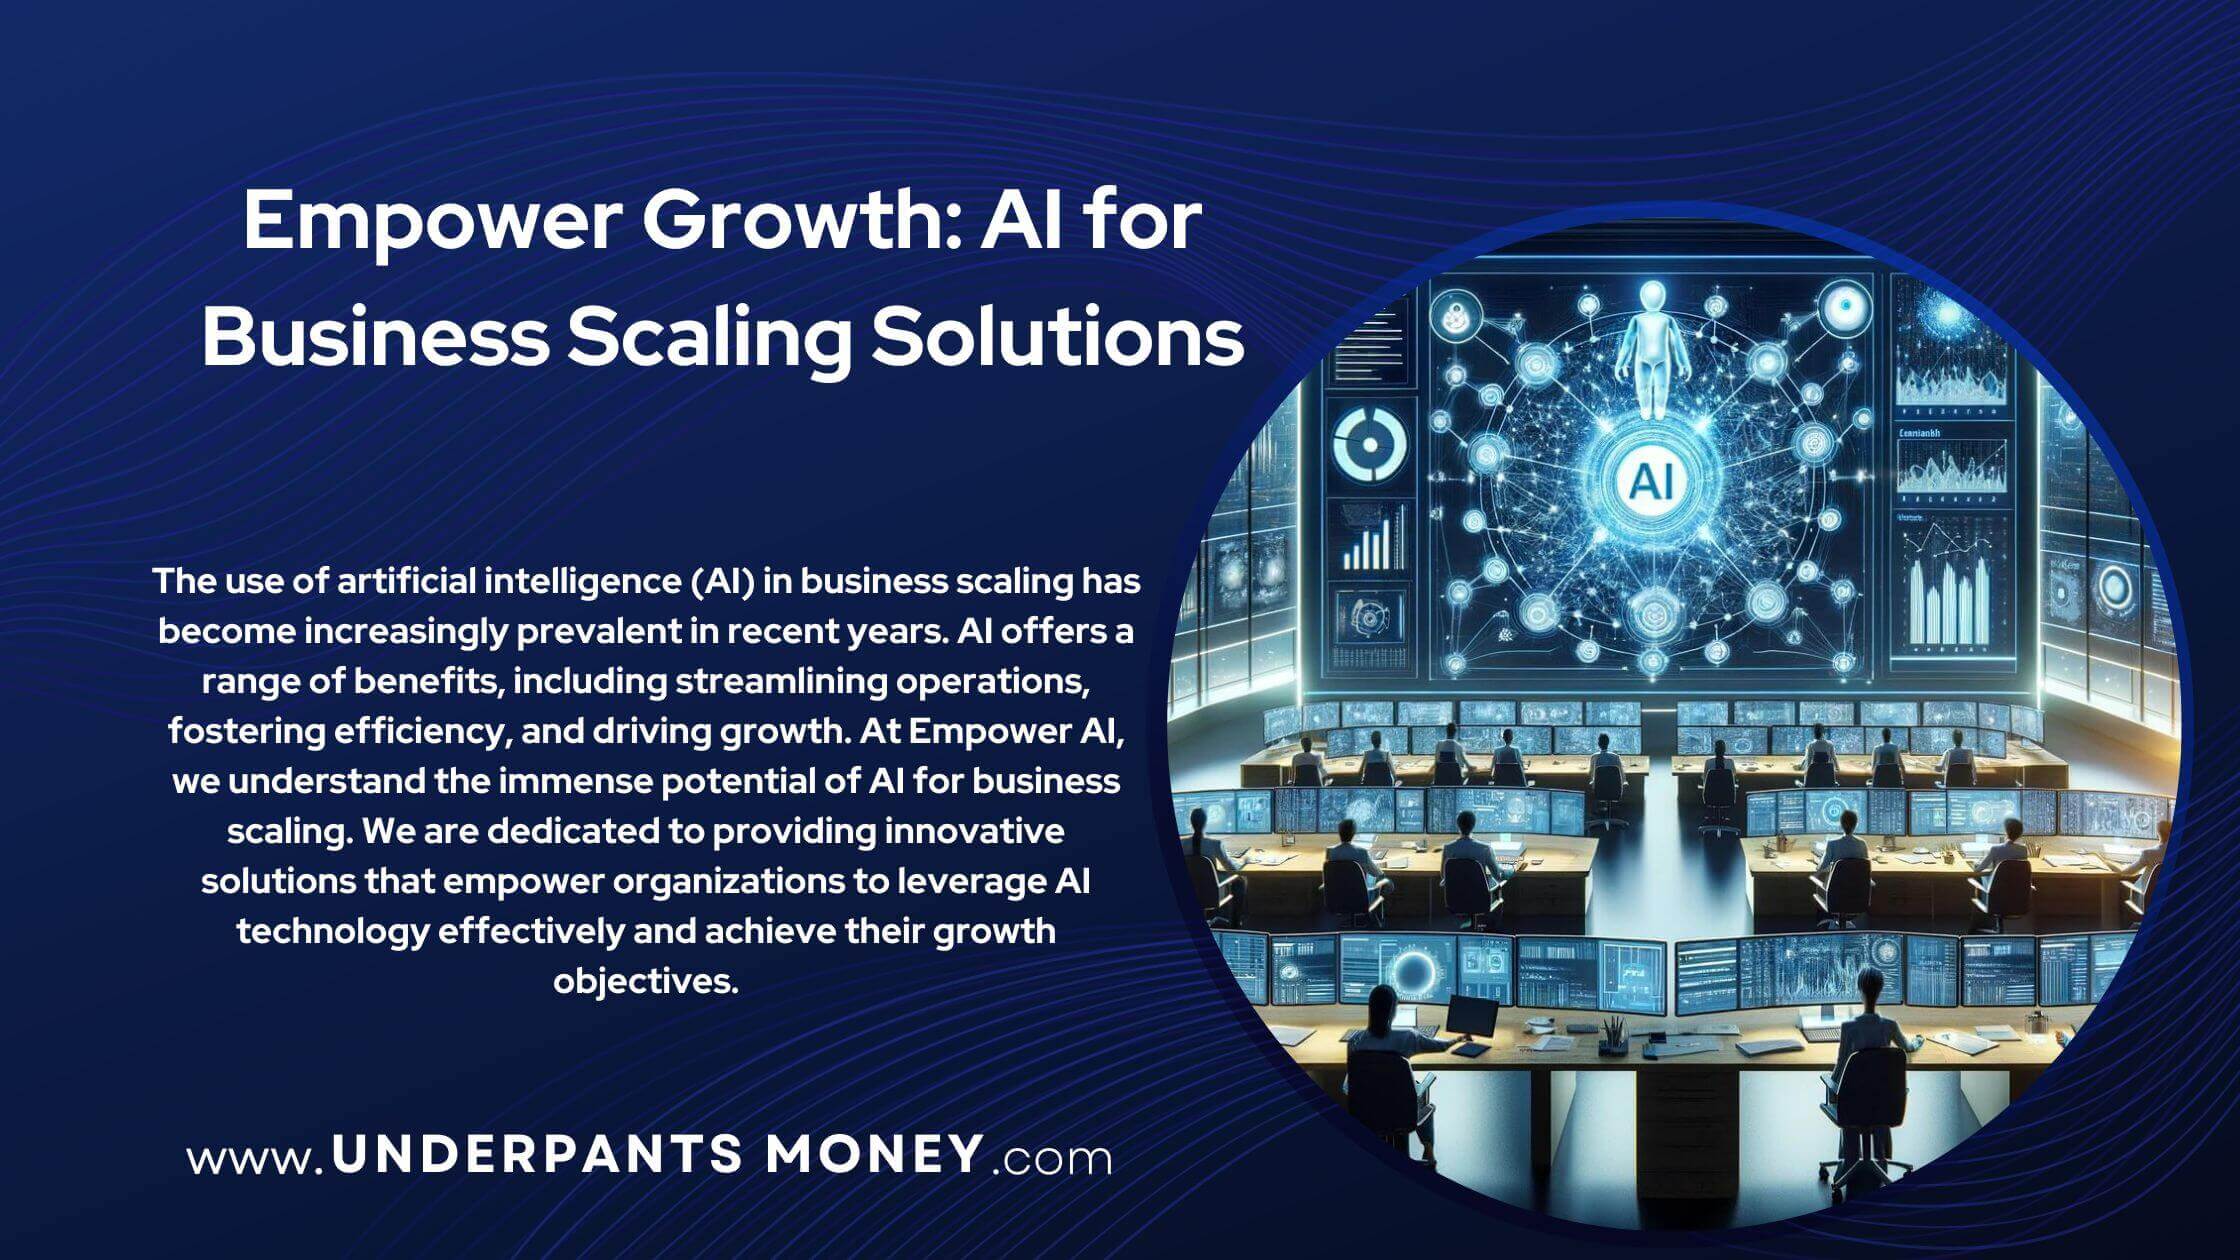 Ai for business scaling title with description on blue with image of AI helping people in a large room of computers